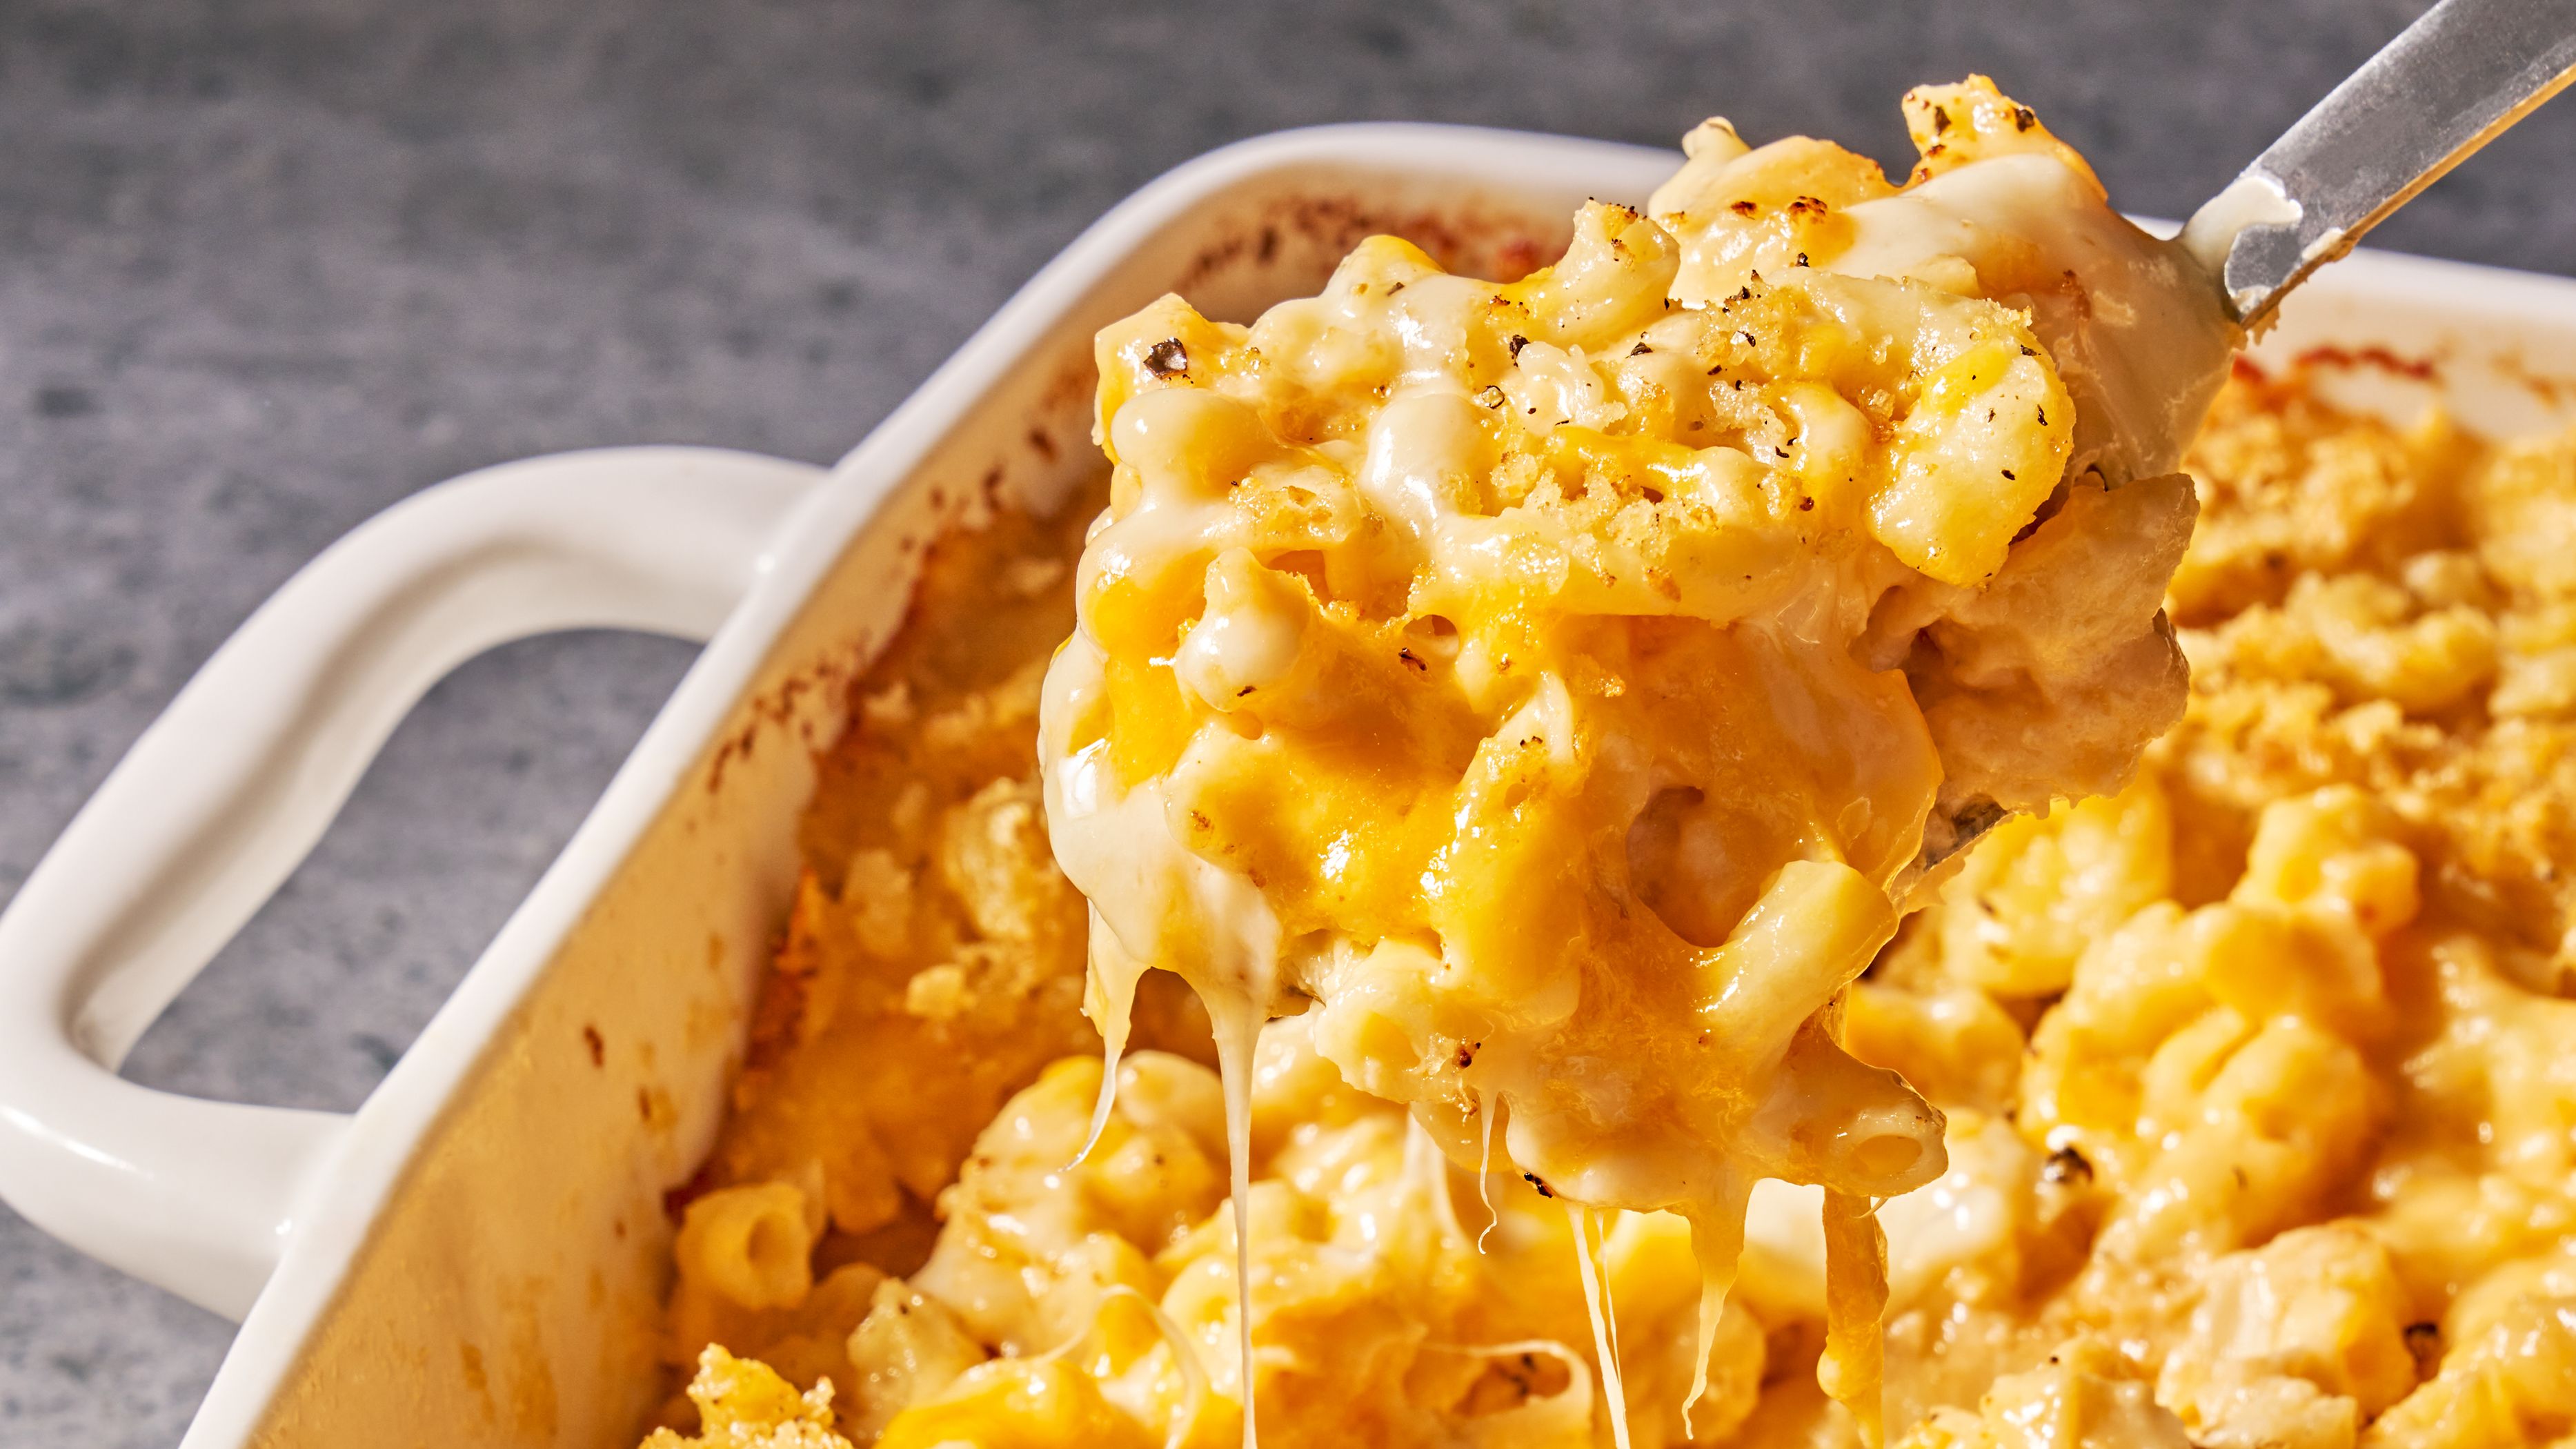 Classic Baked Macaroni And Cheese Recipe